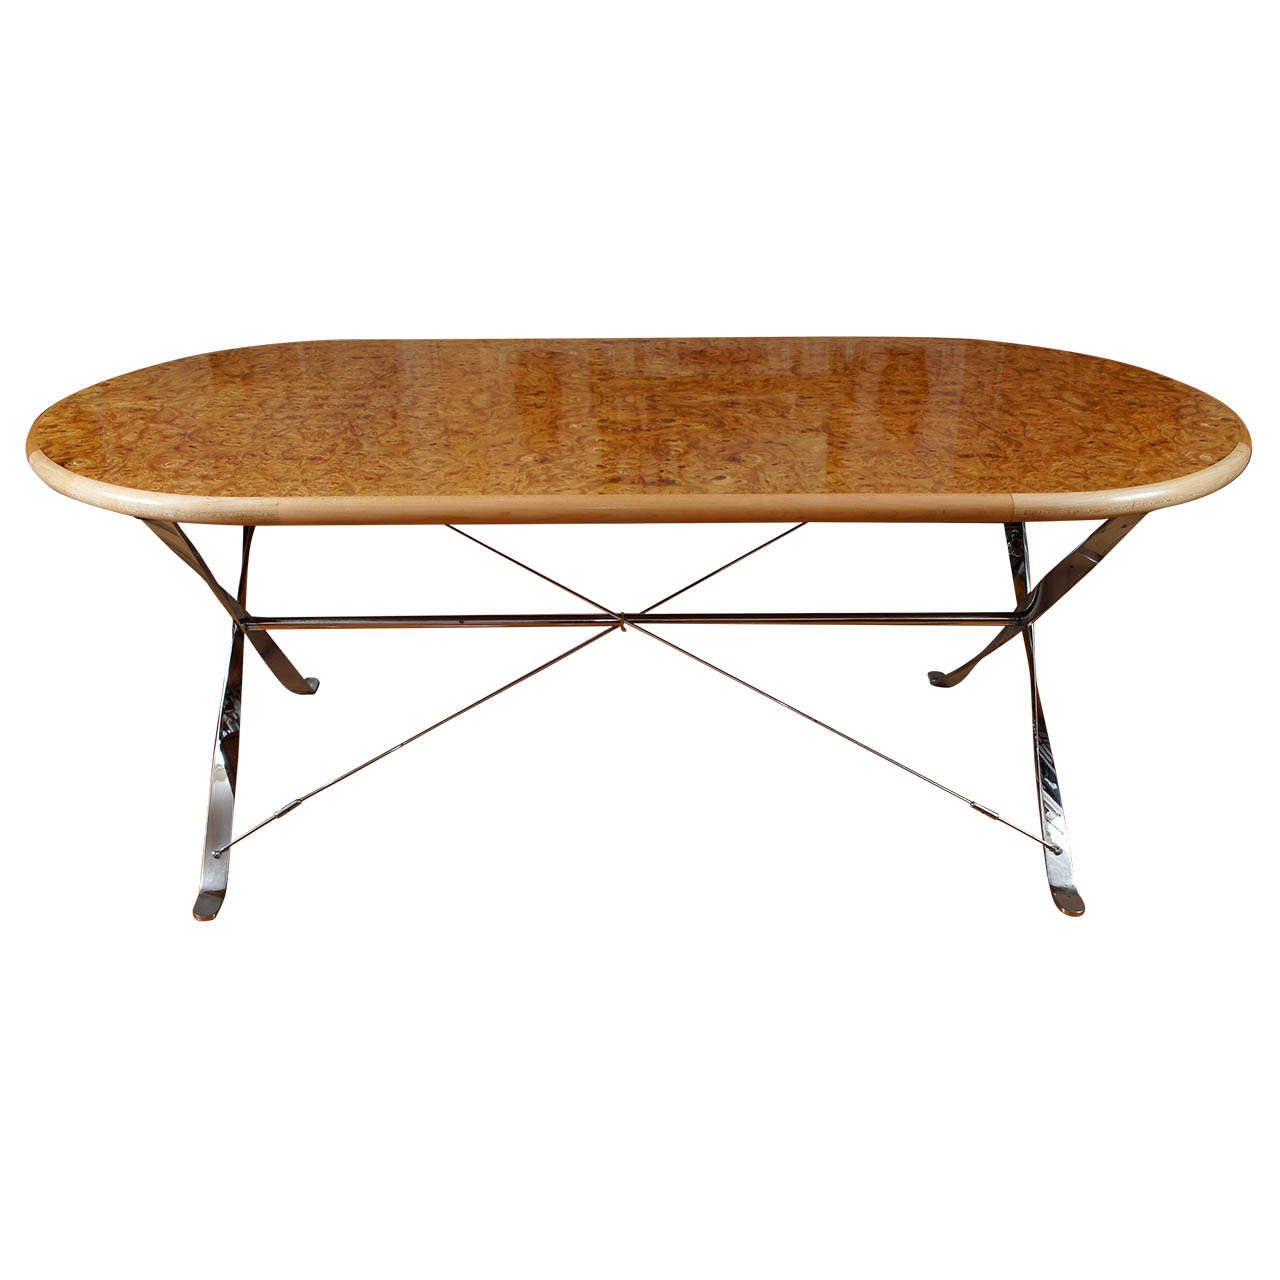 Oval Burl Maple Dining Table on Stainless Steel Base For Sale